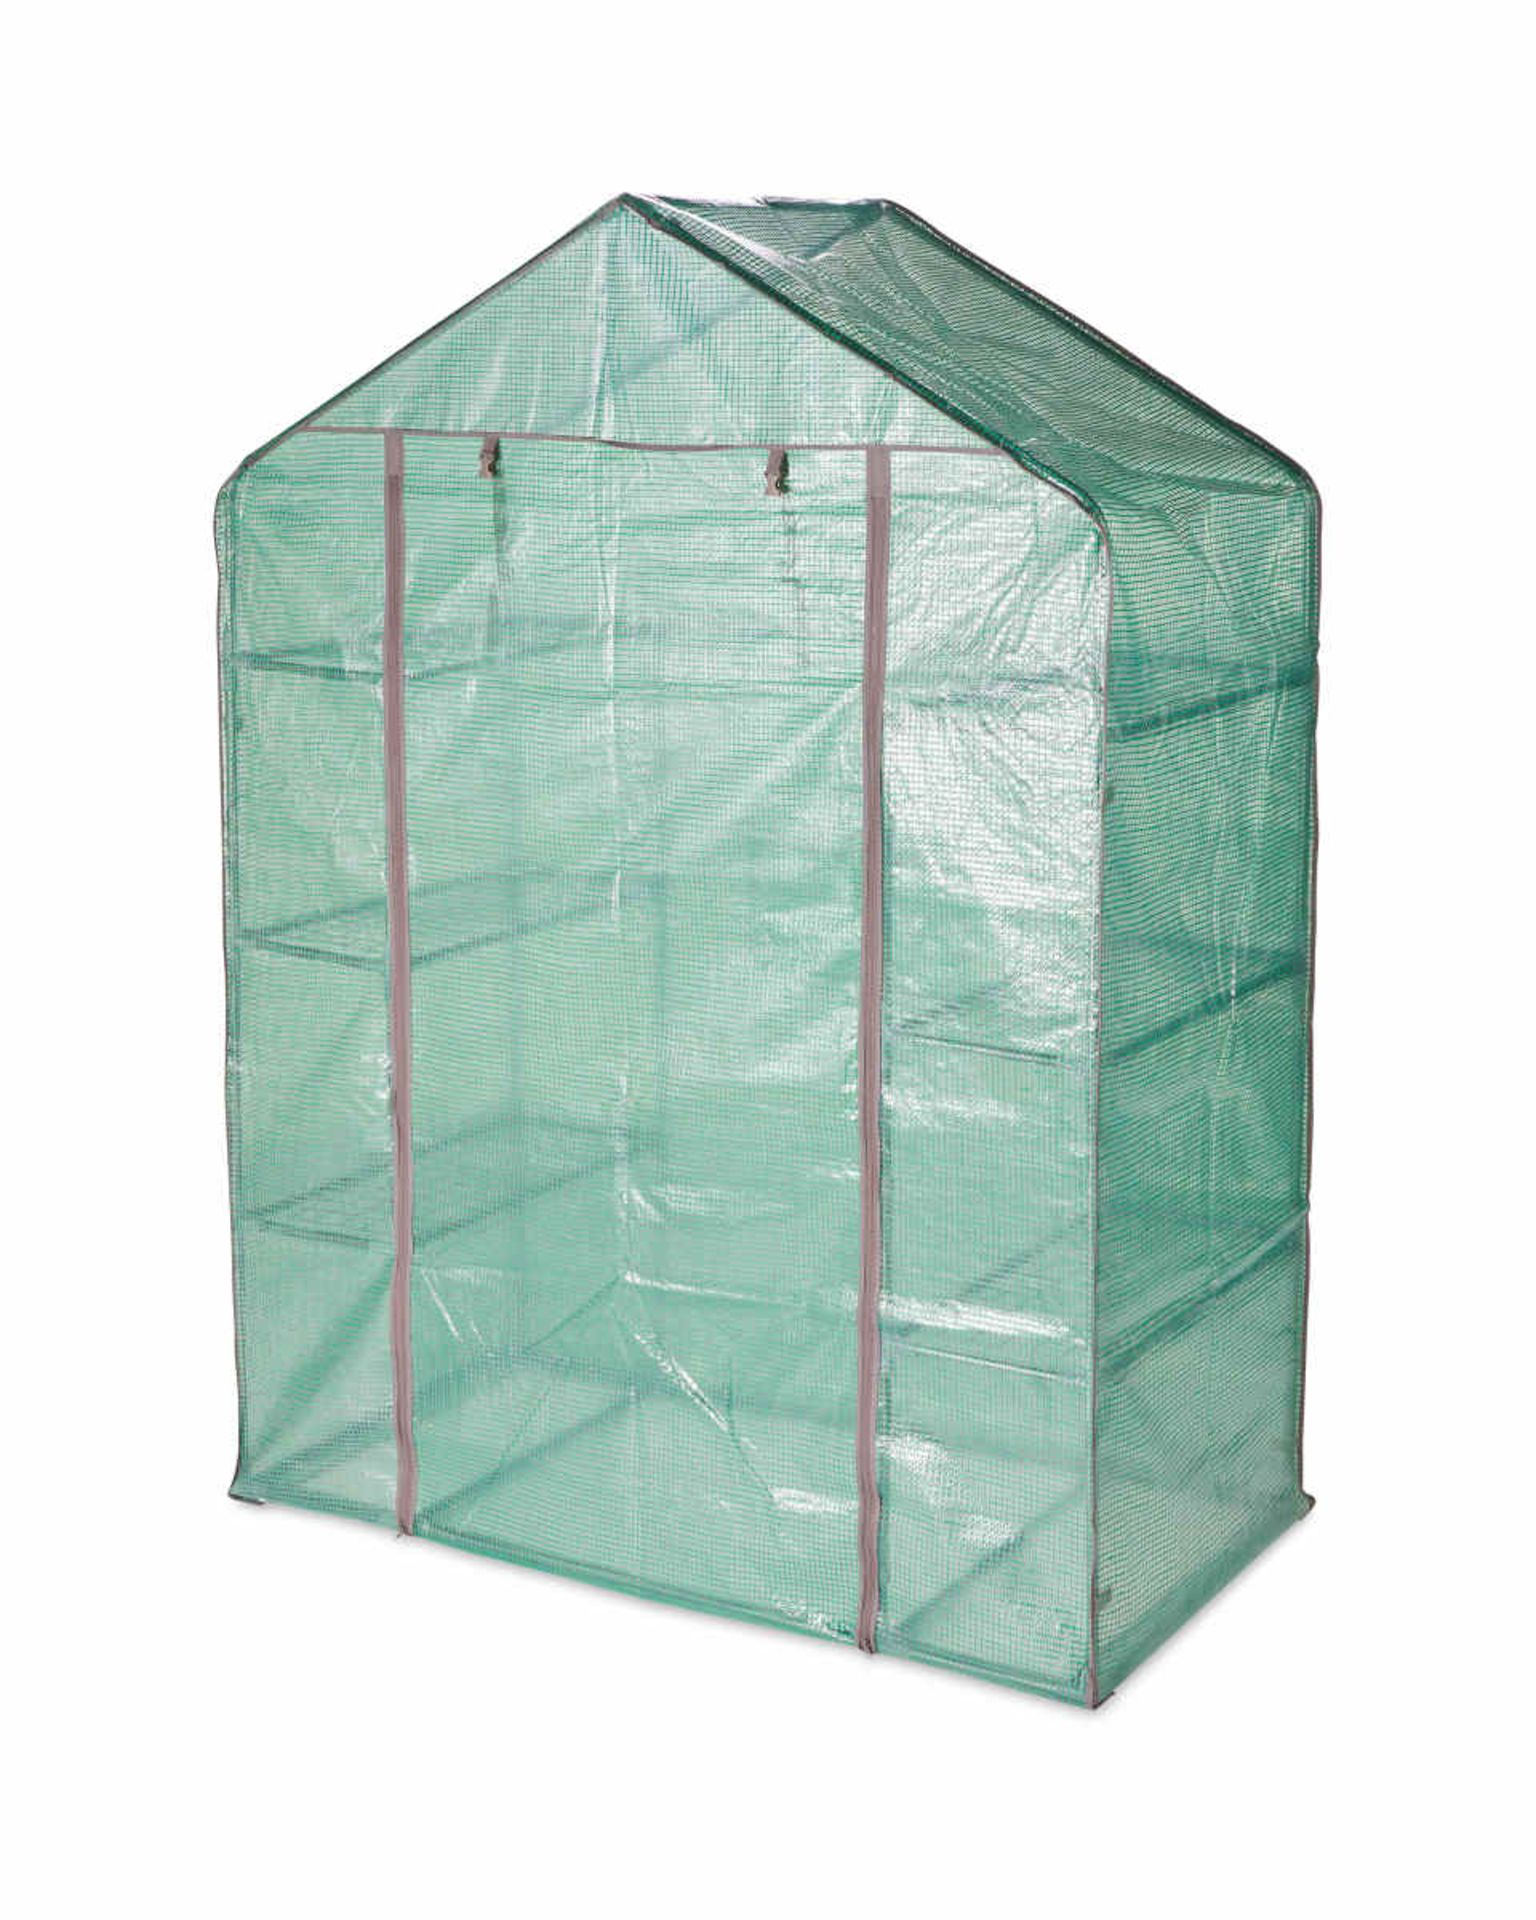 Walk In Greenhouse. Set up a sustainable food source in your home with the help of this Walk In